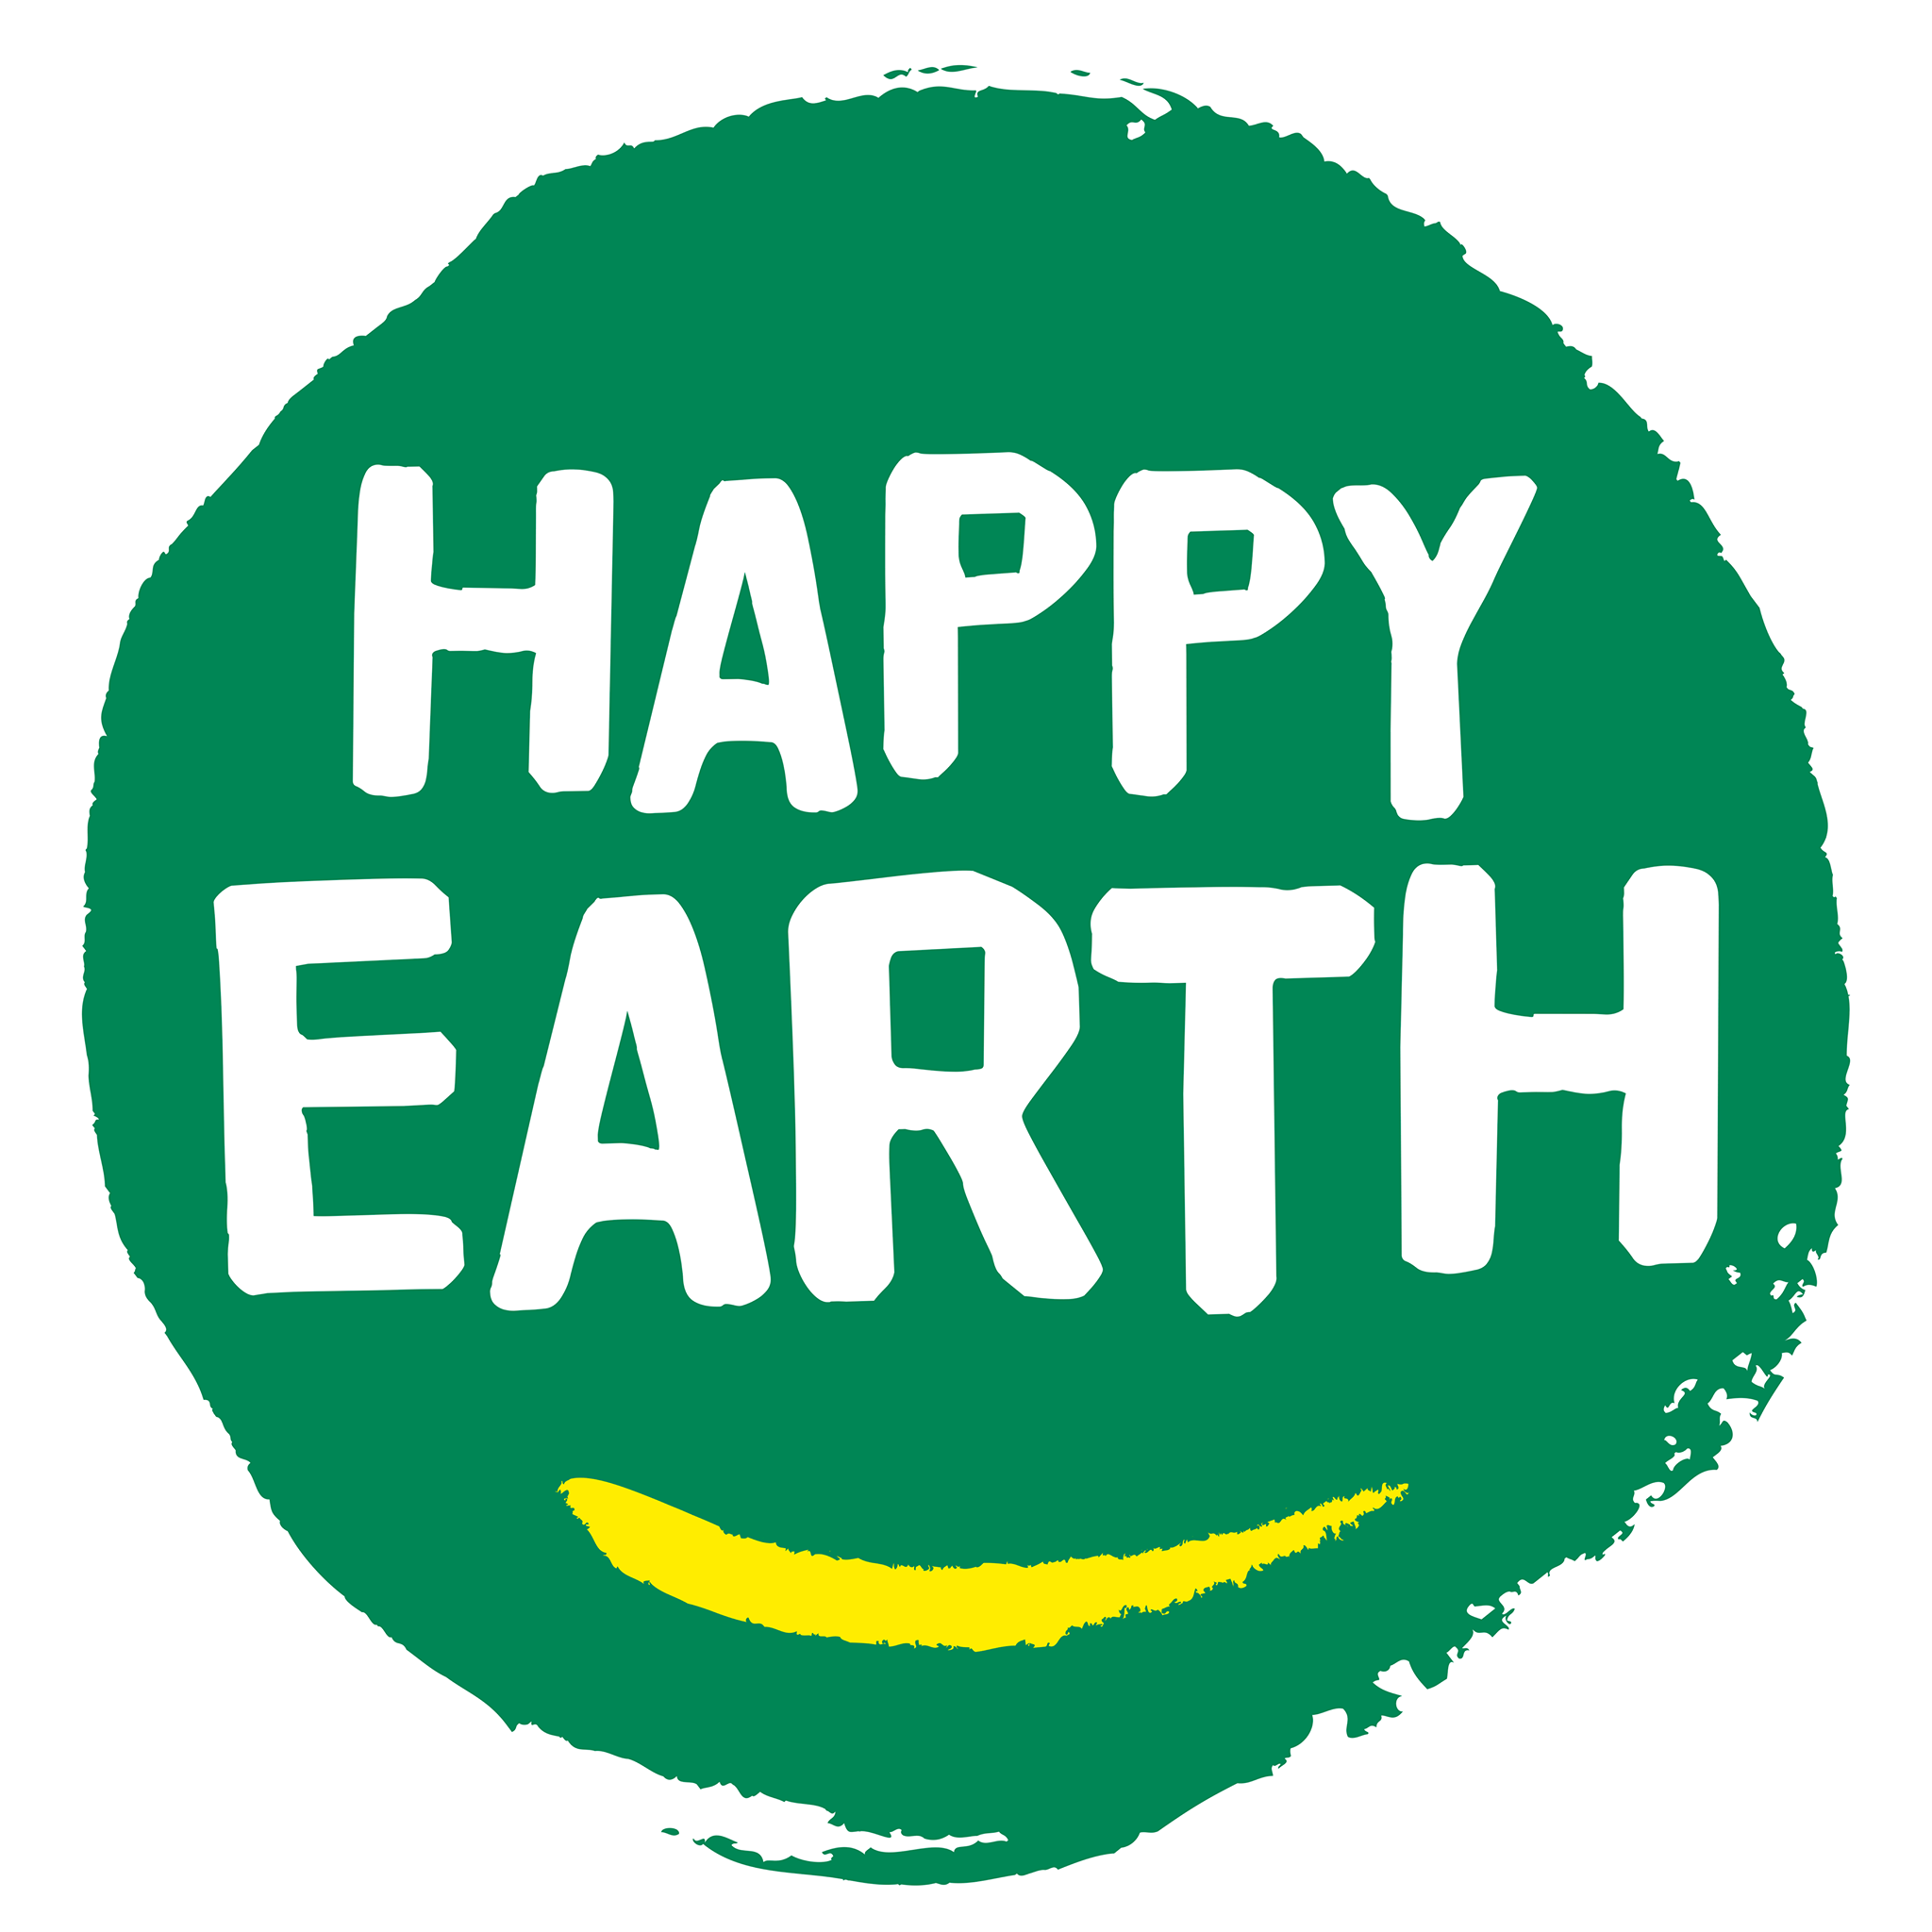 The logo of Happy Earth, it's a green circle, the text "Happy Earth" in white and a yellow line underneath, which resembles a smile.